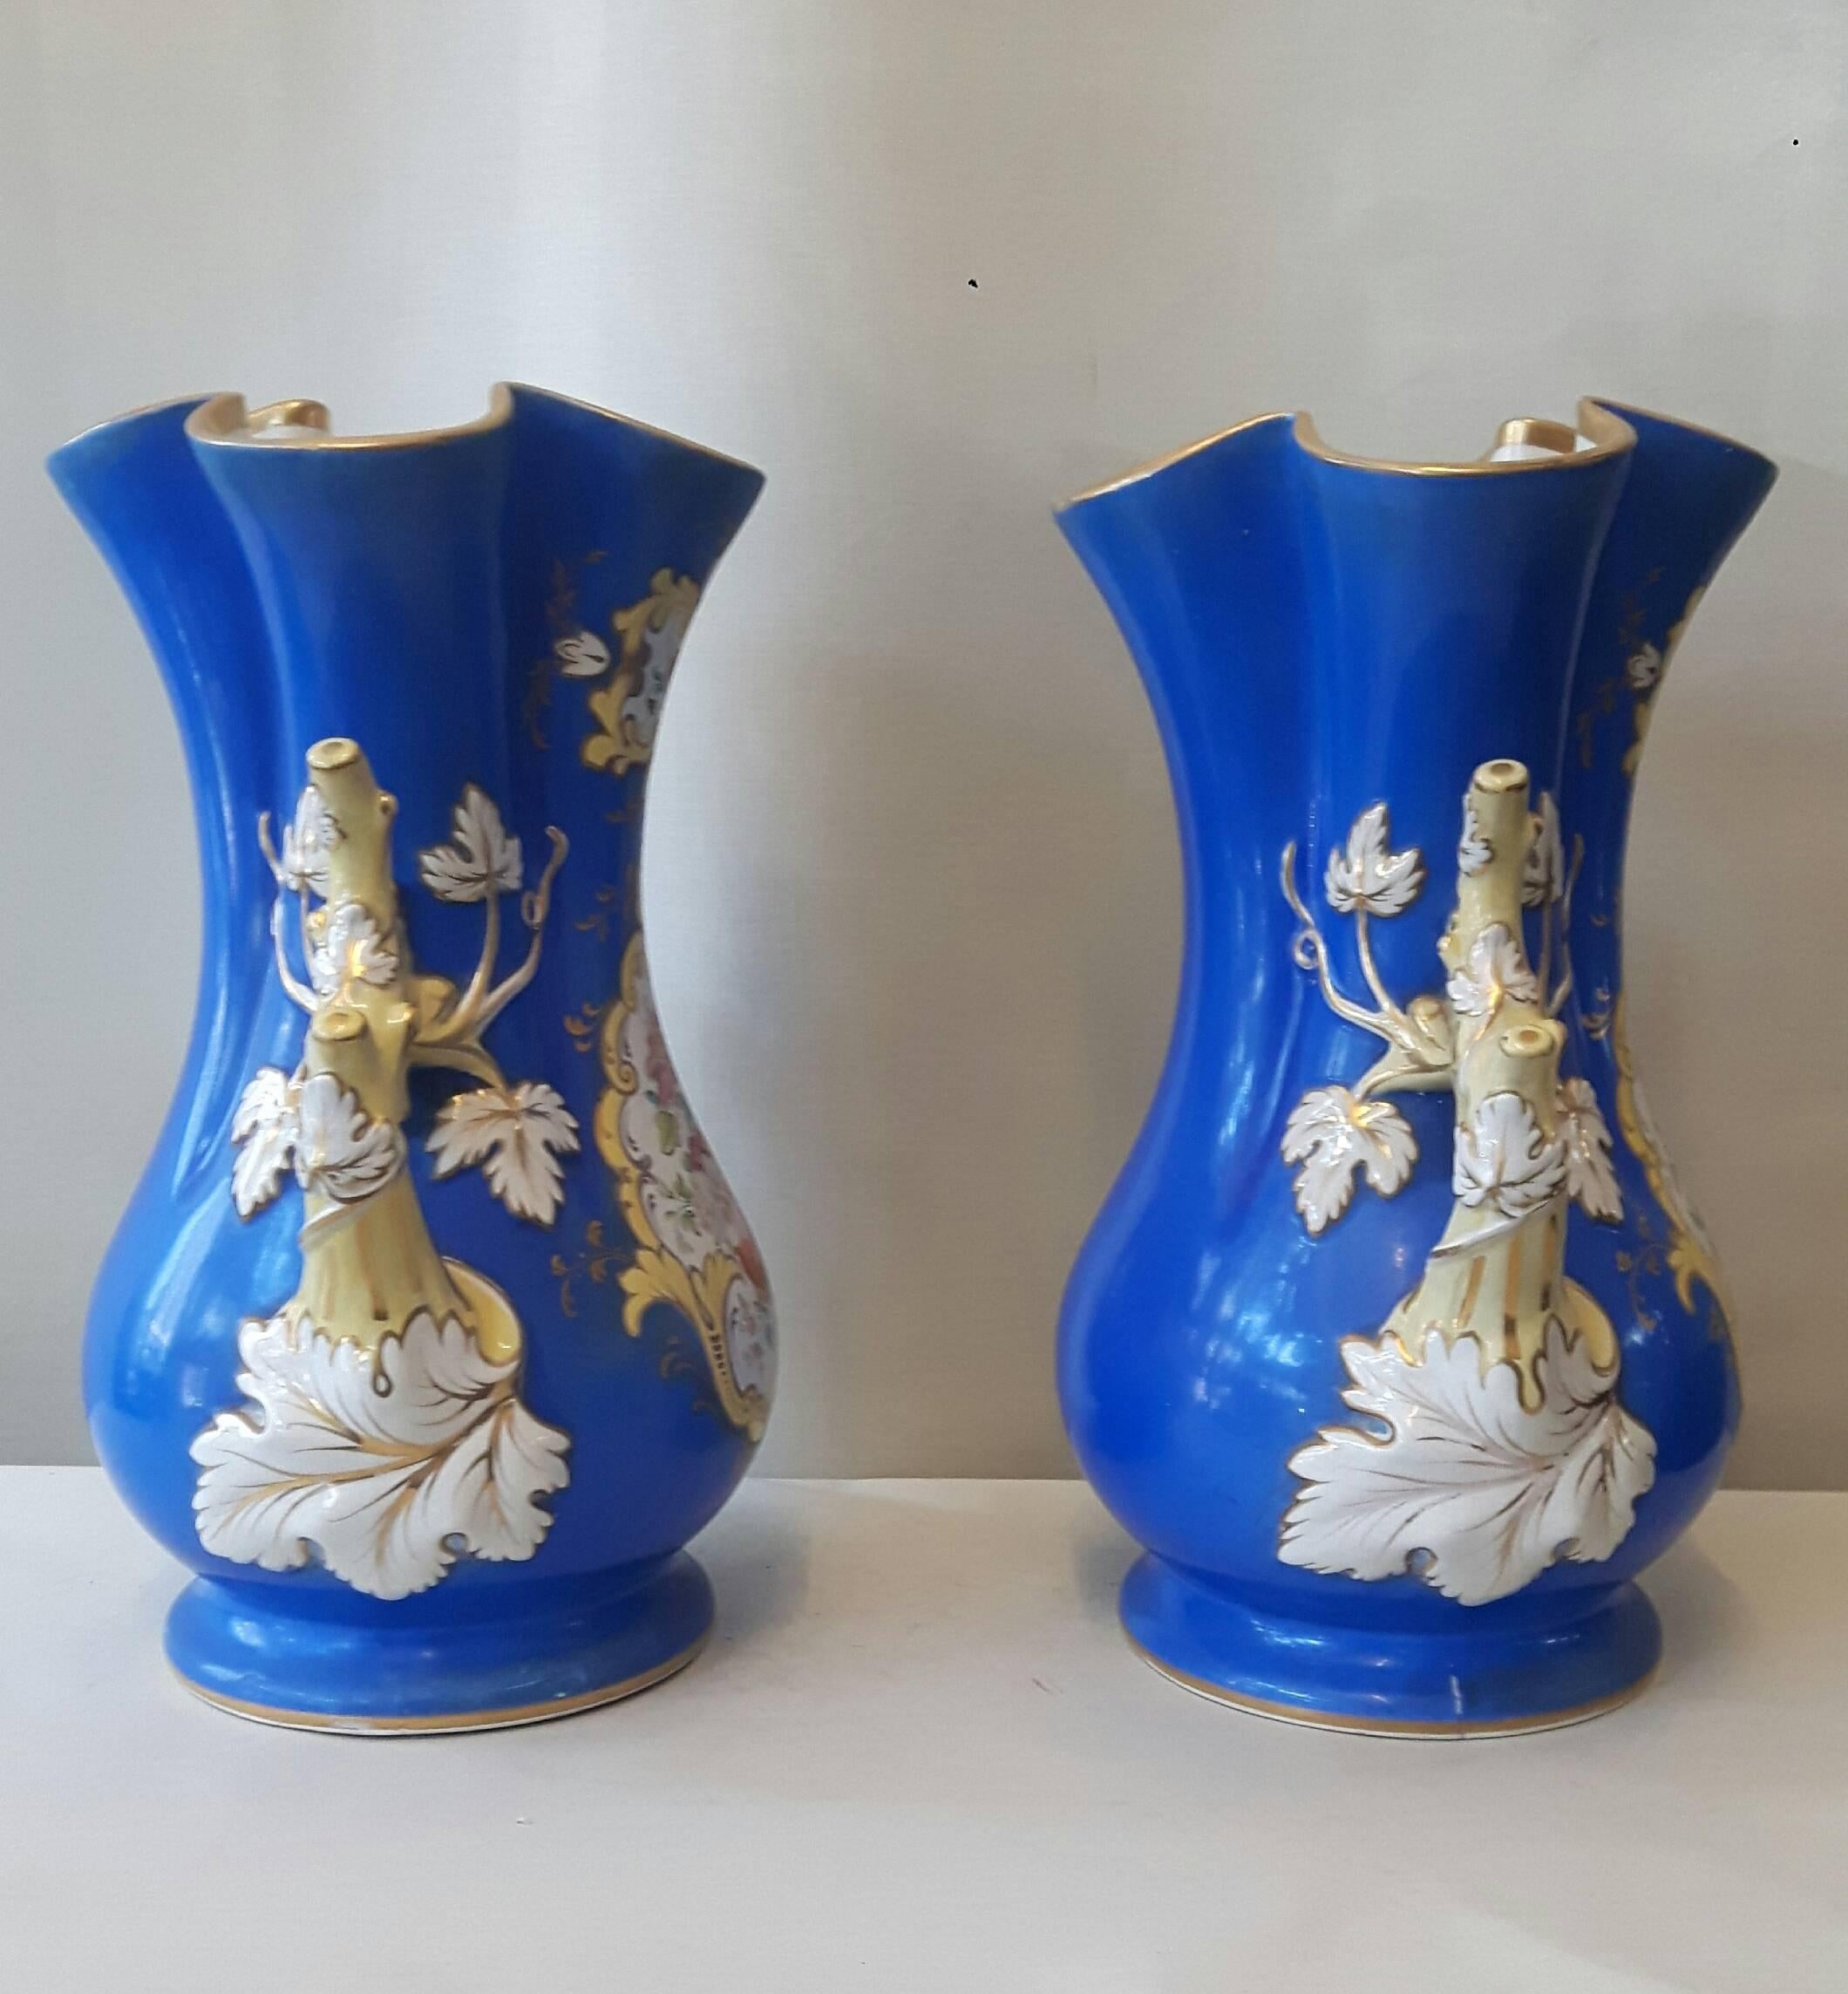 A decorative pair of Ridgway vases, hand-painted with central flower panels and elegantly painted and gilded handles.